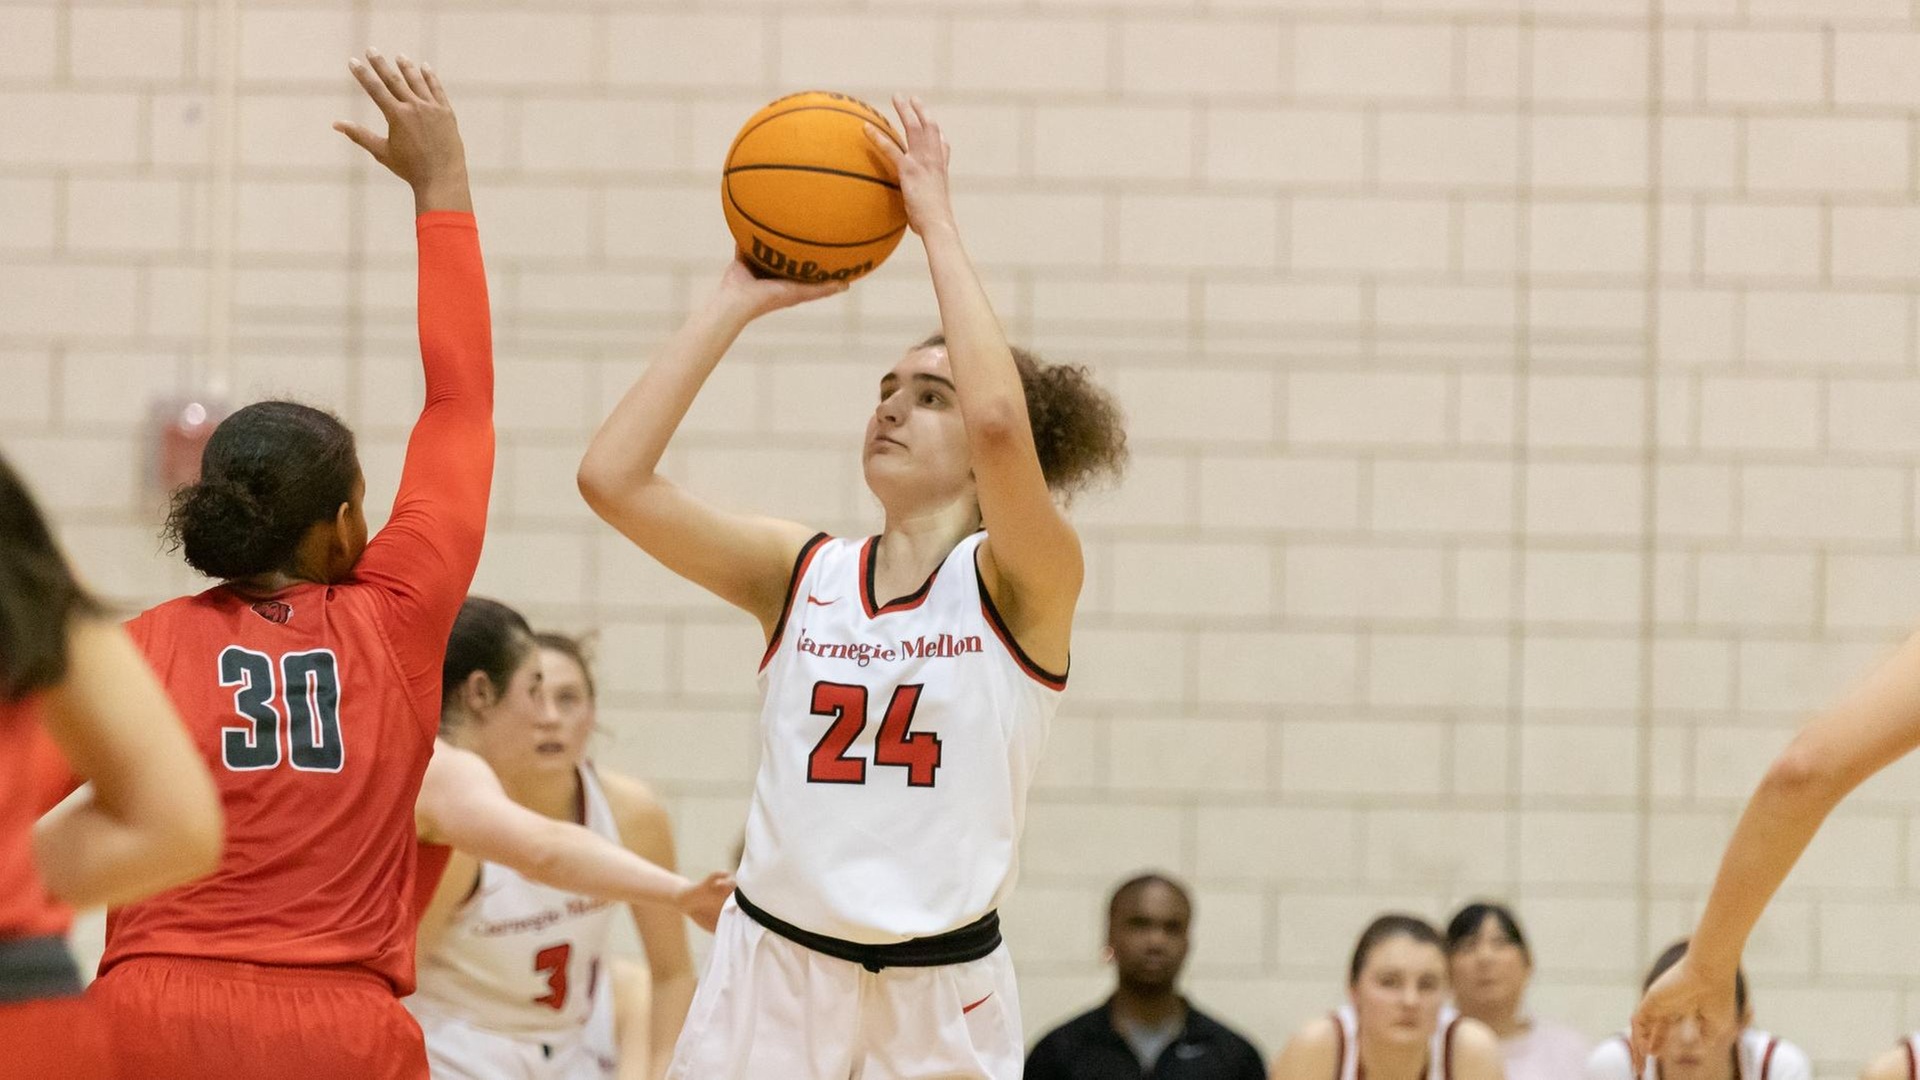 women's basketball player wearing a white uniform takes a shot over the arm of a defender wearing a red uniform